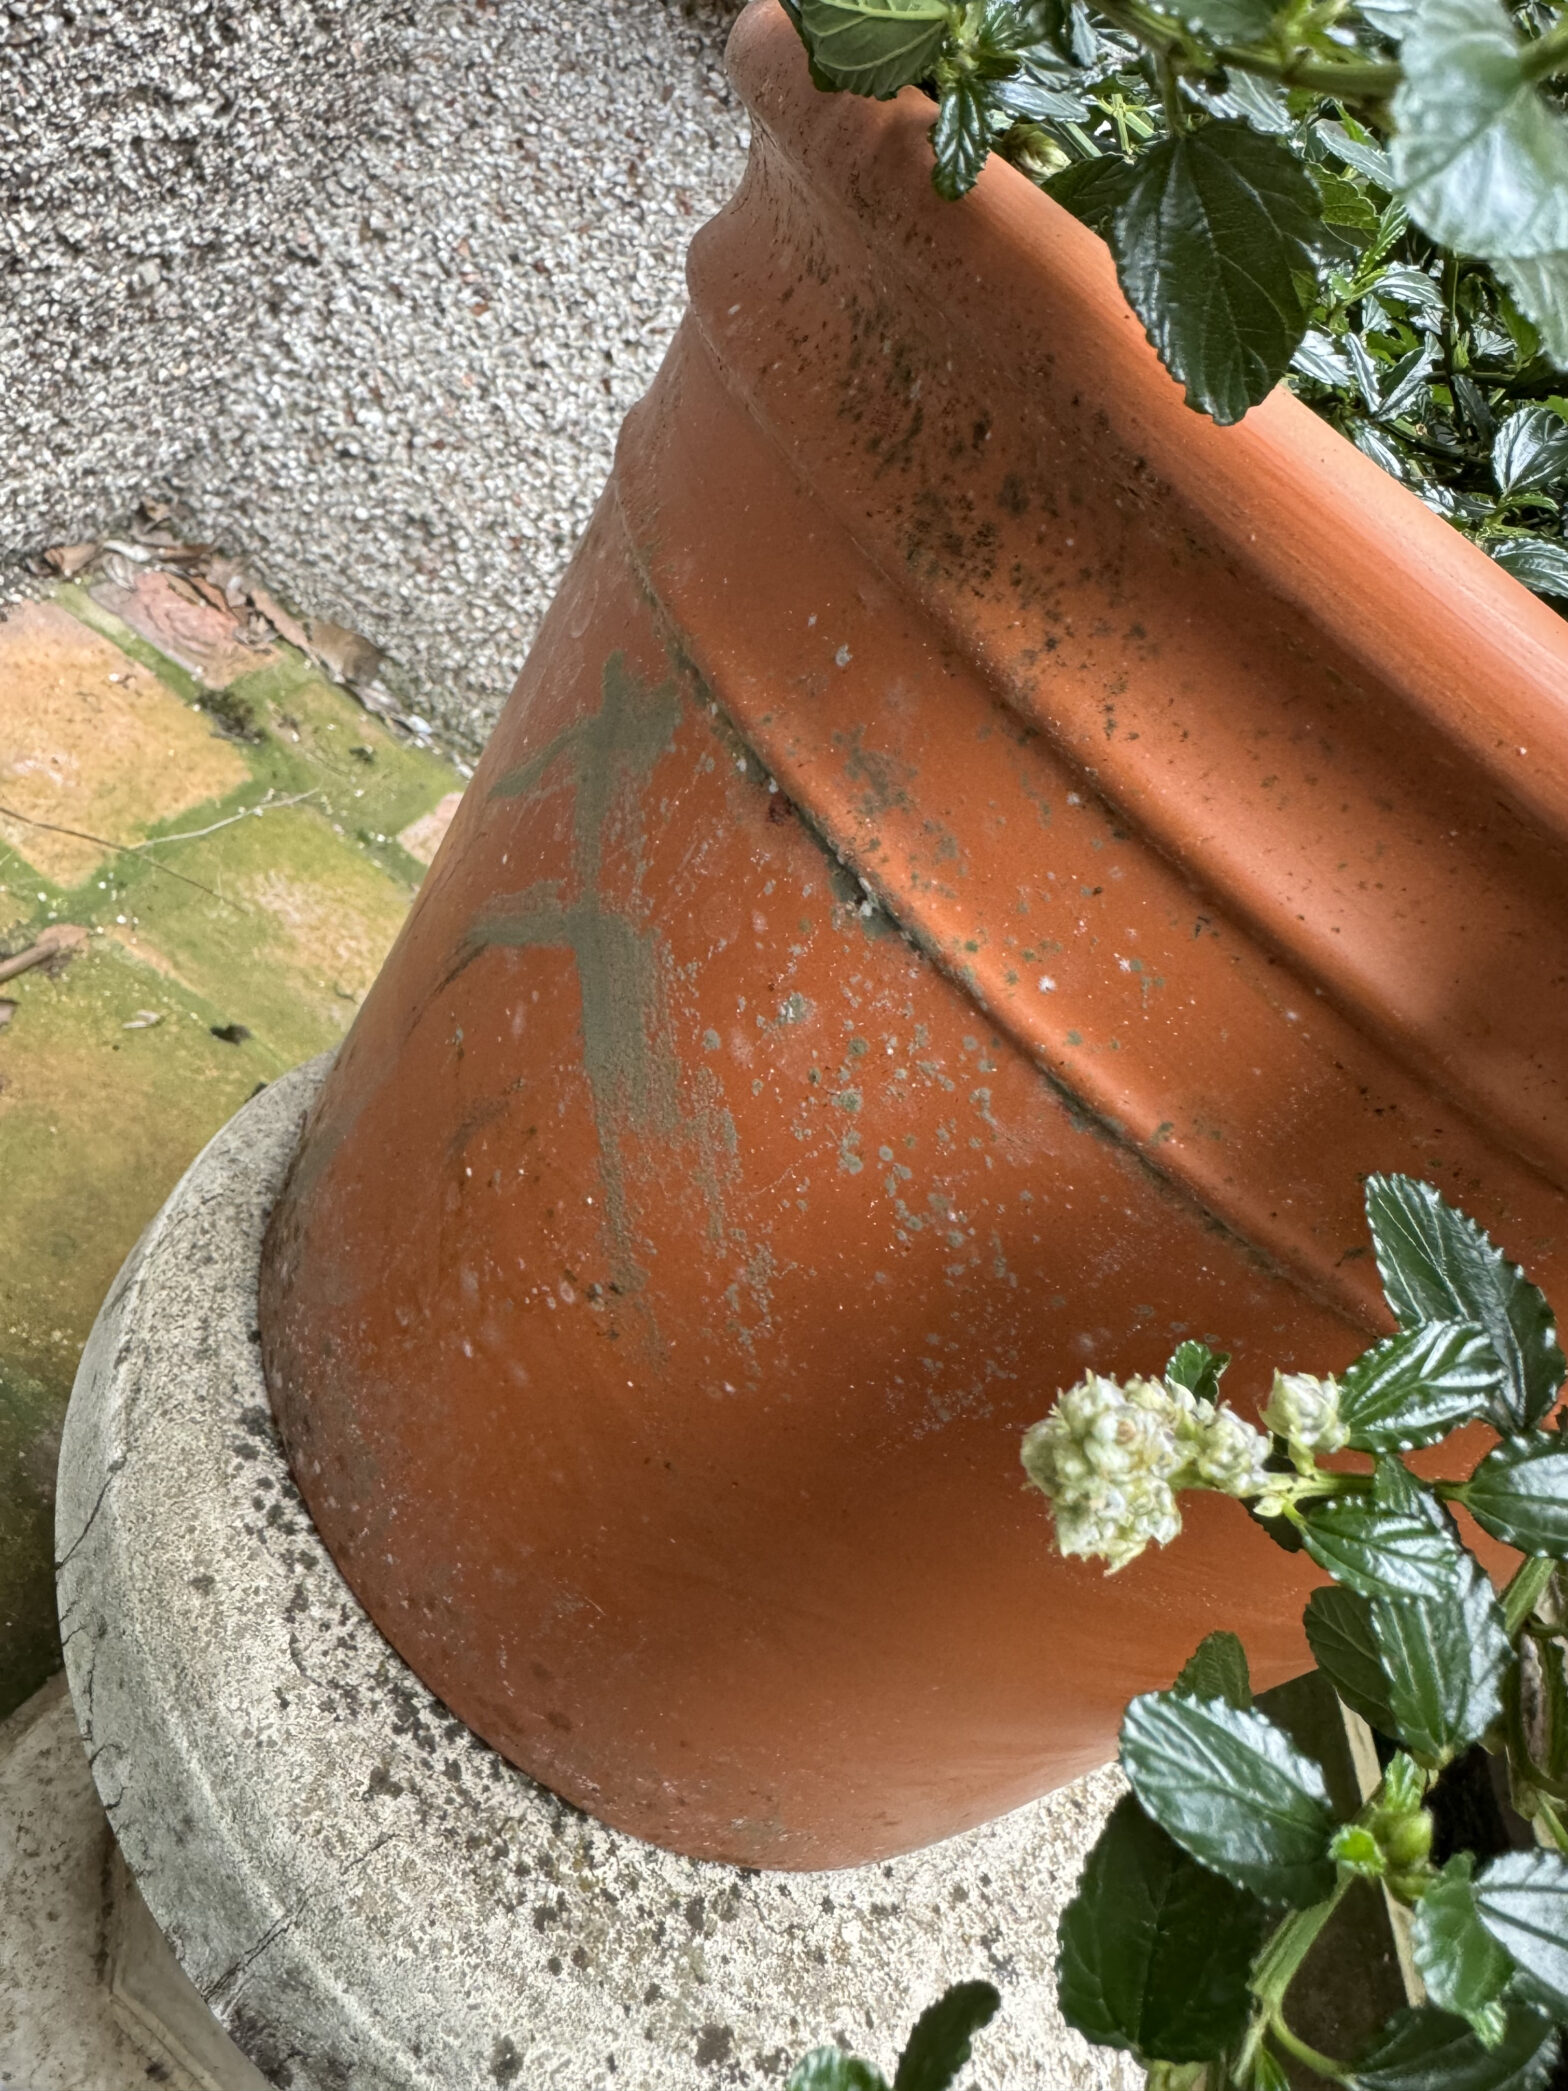 A new terracotta pot showing spots of moss or mould or algae